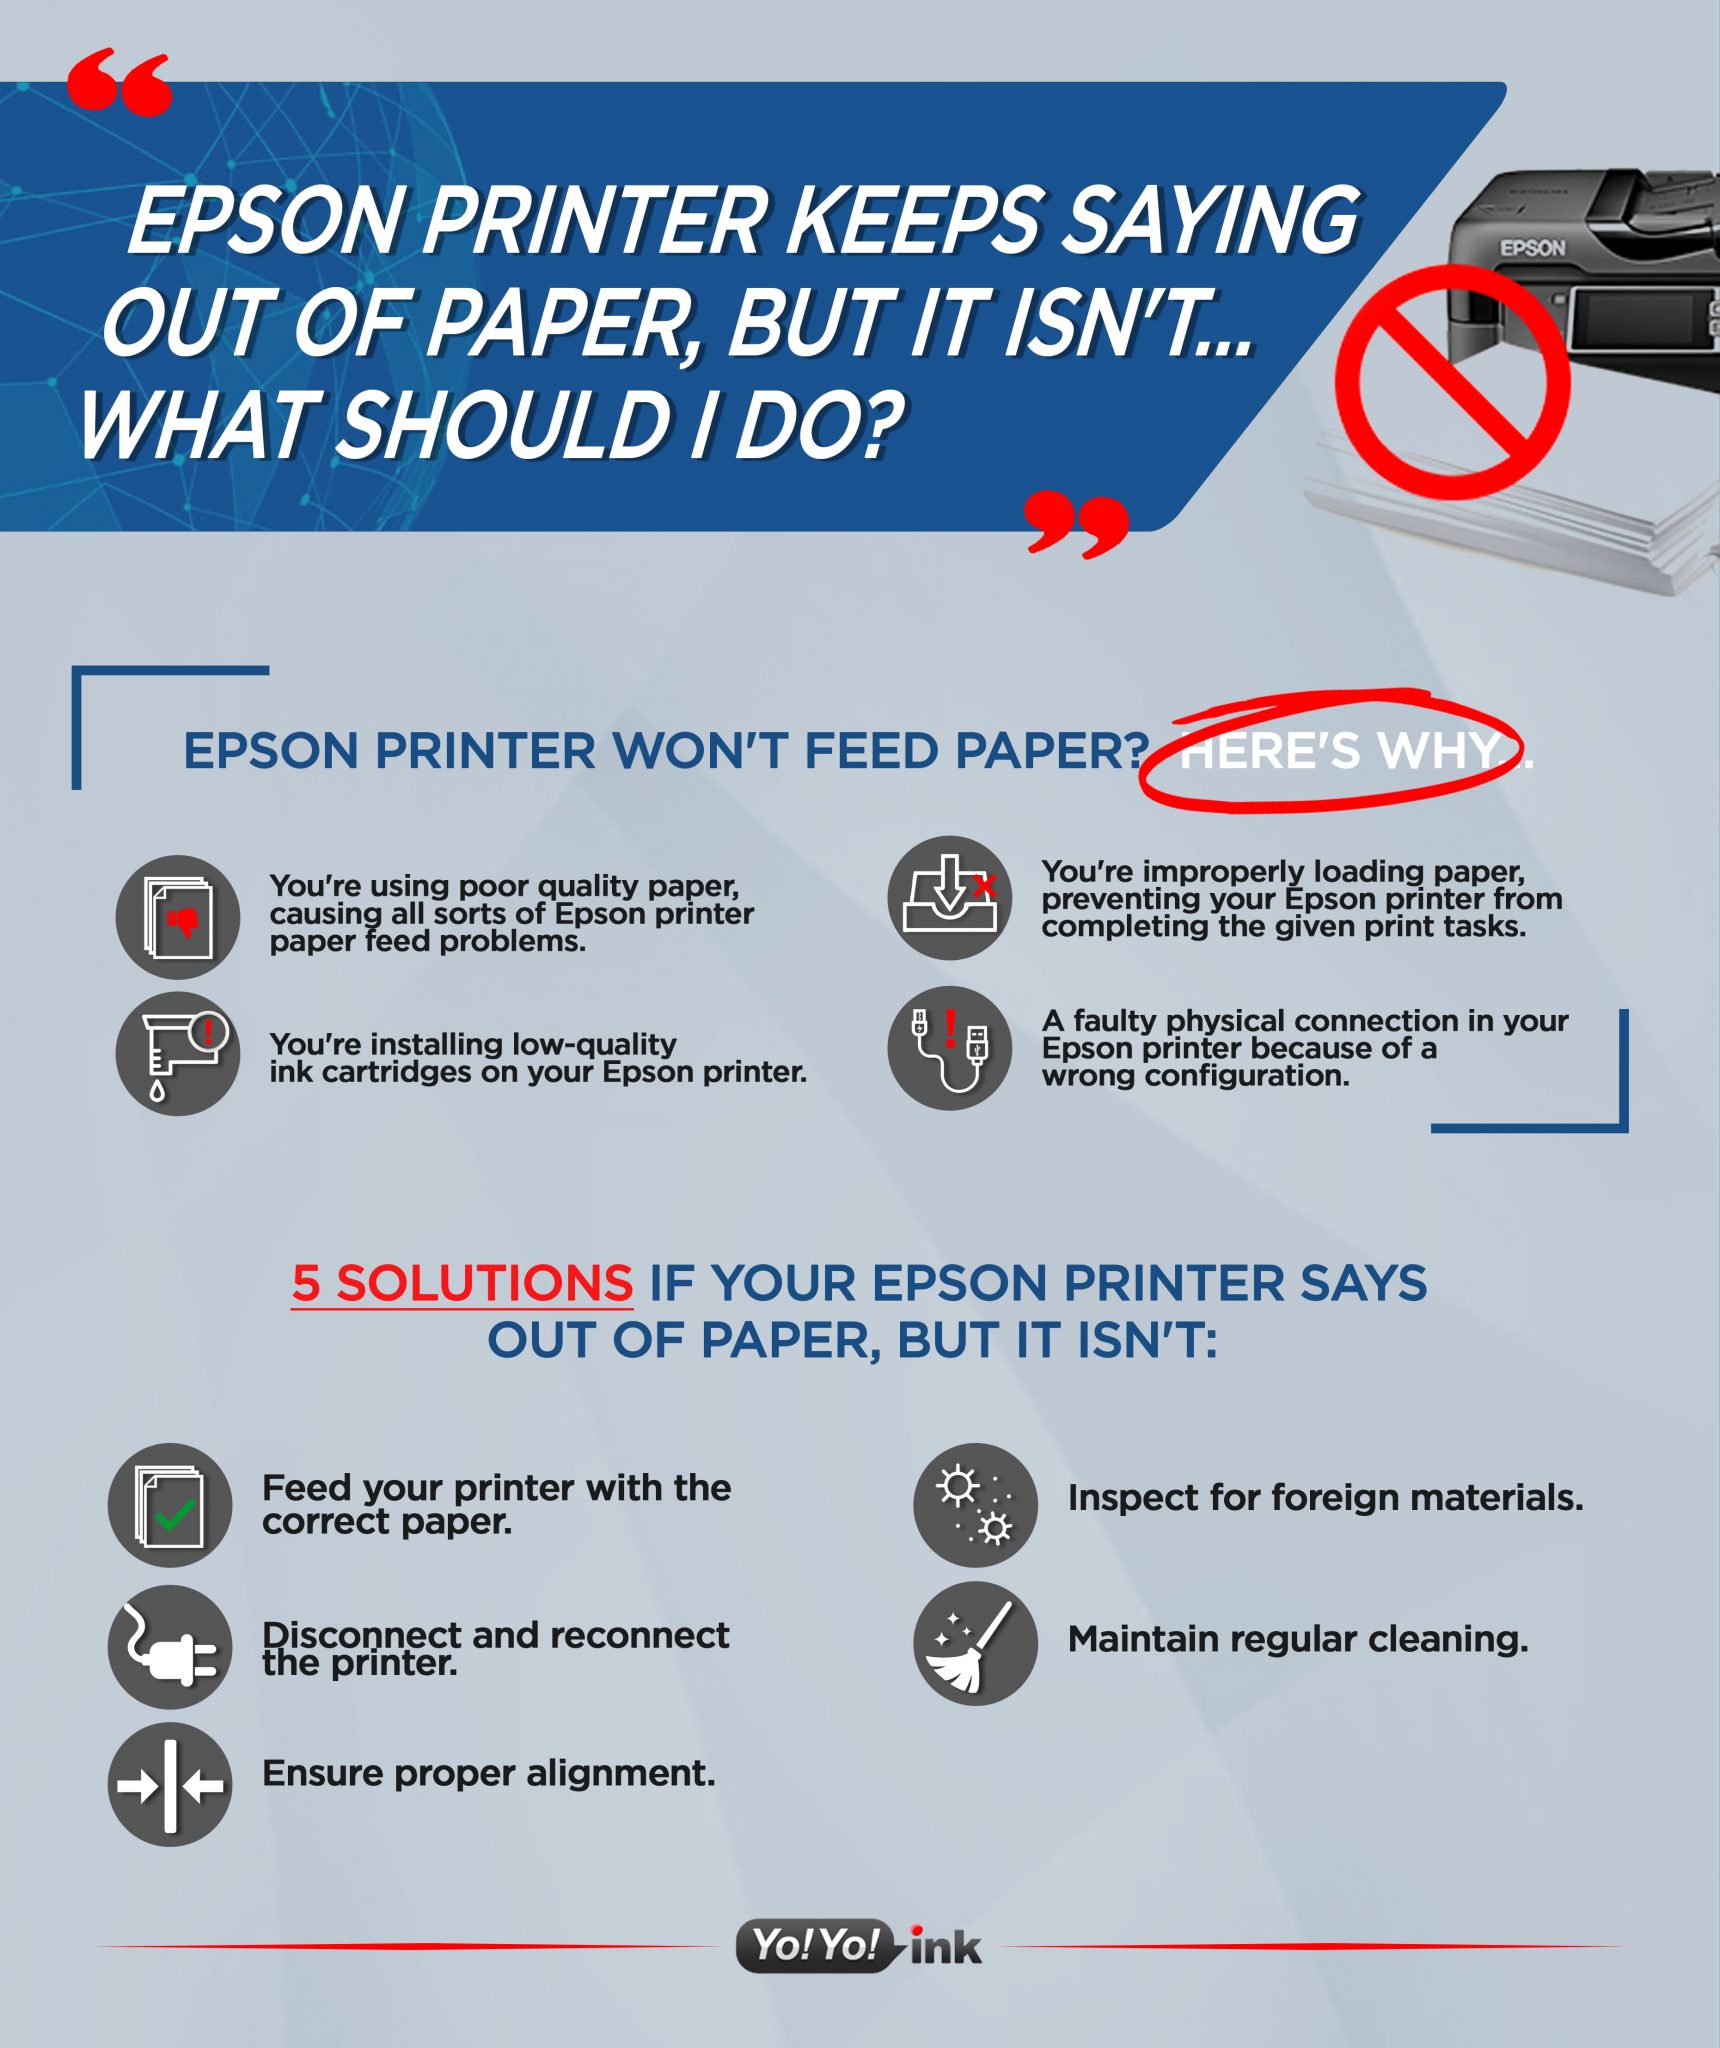 Epson Printer Keeps Saying Out Of Paper